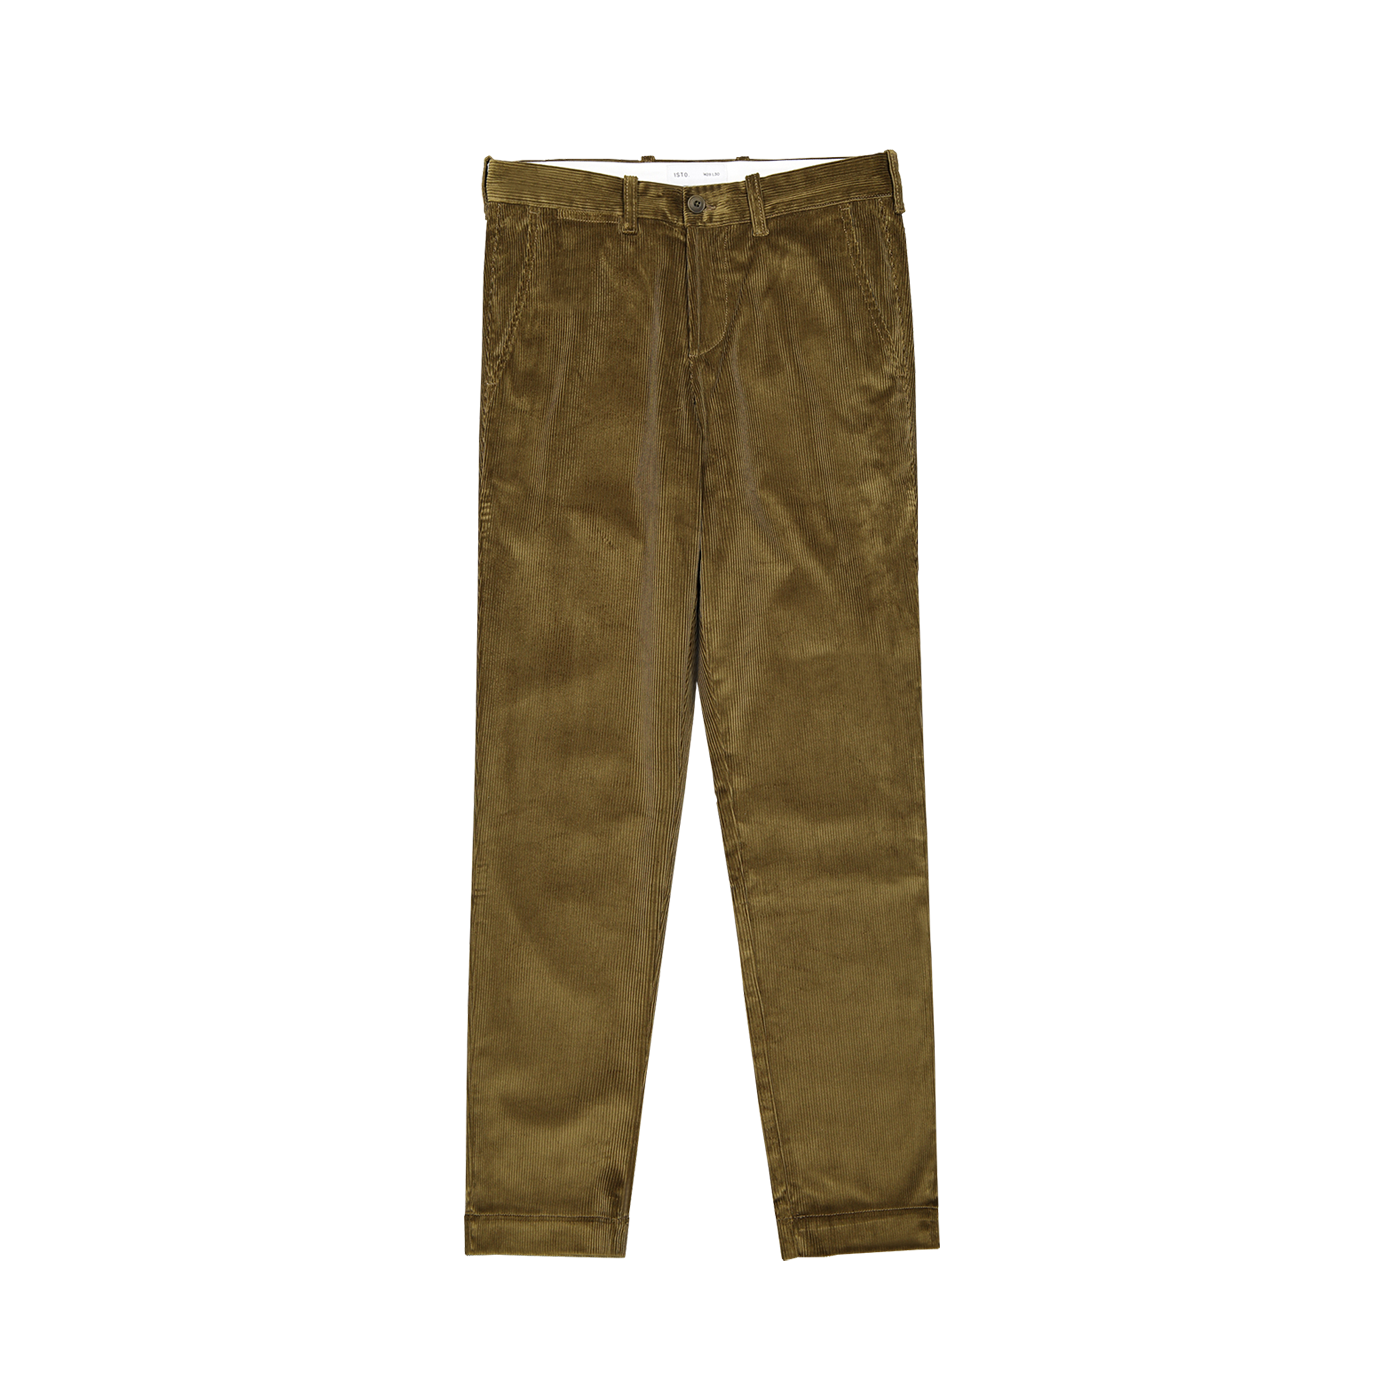 CORDUROY TROUSERS Trousers ISTO. Olive Green W30-L30 